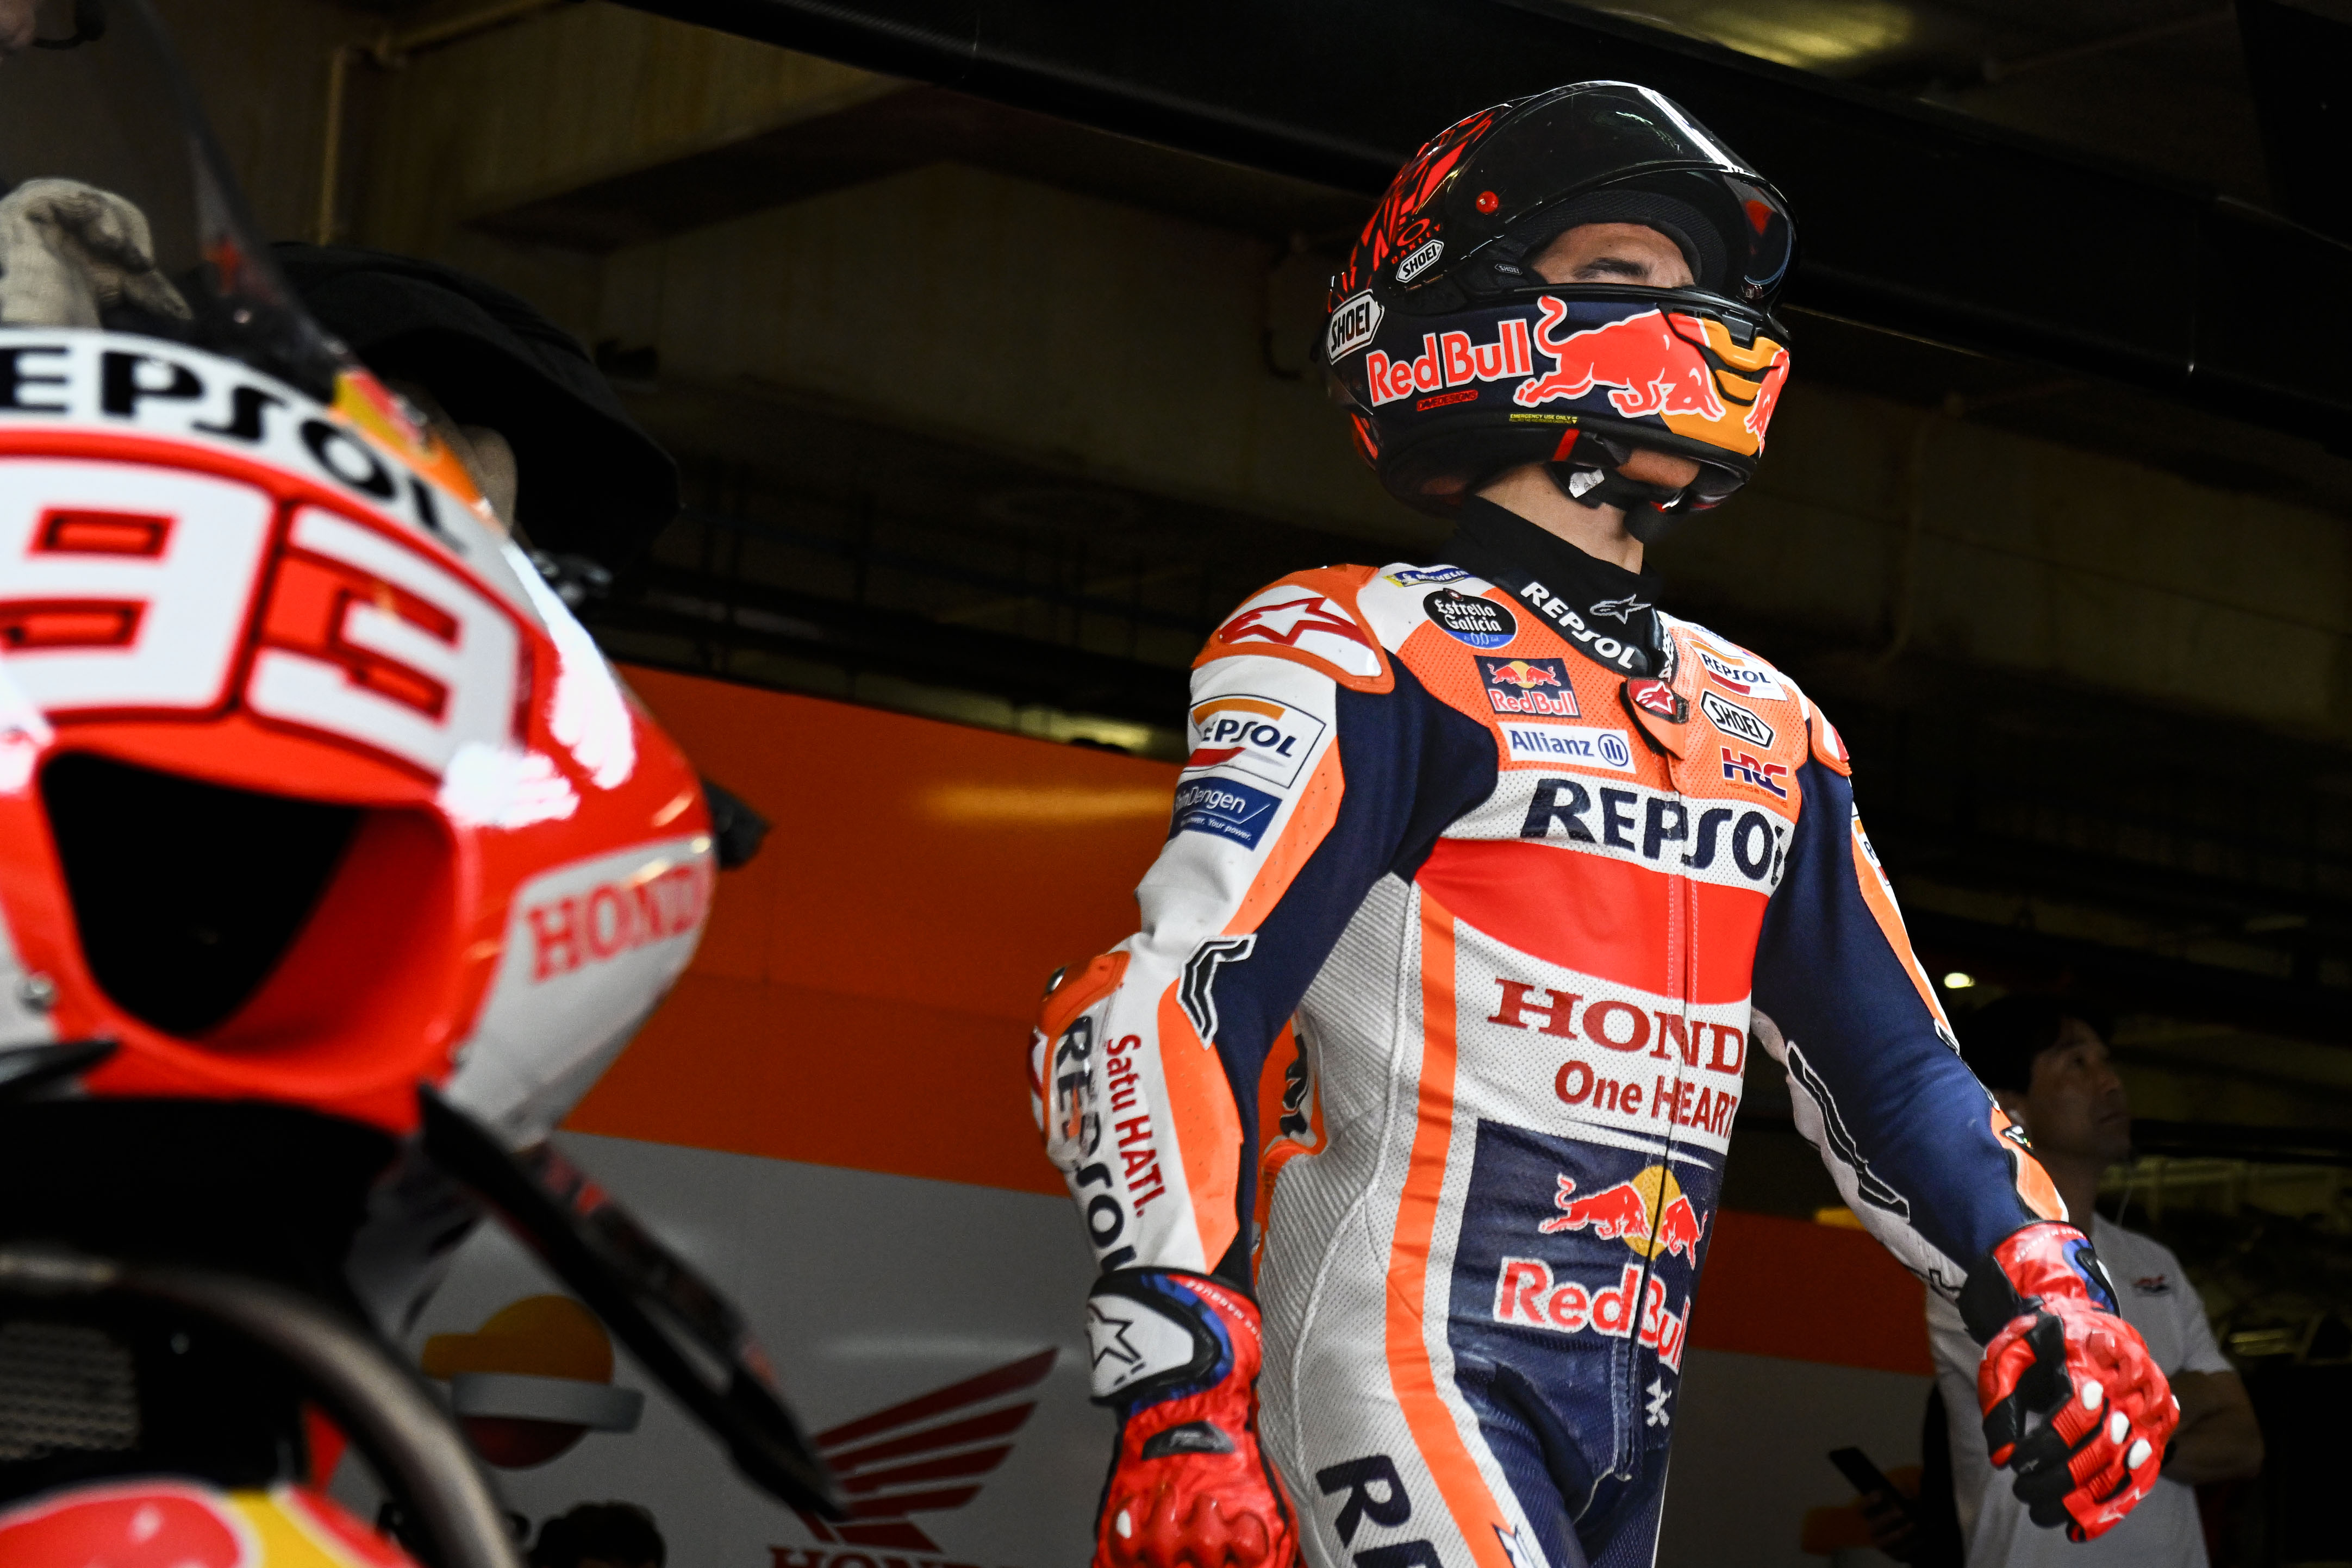 Honda chassis shock shows its priorities amid Marquez pressure